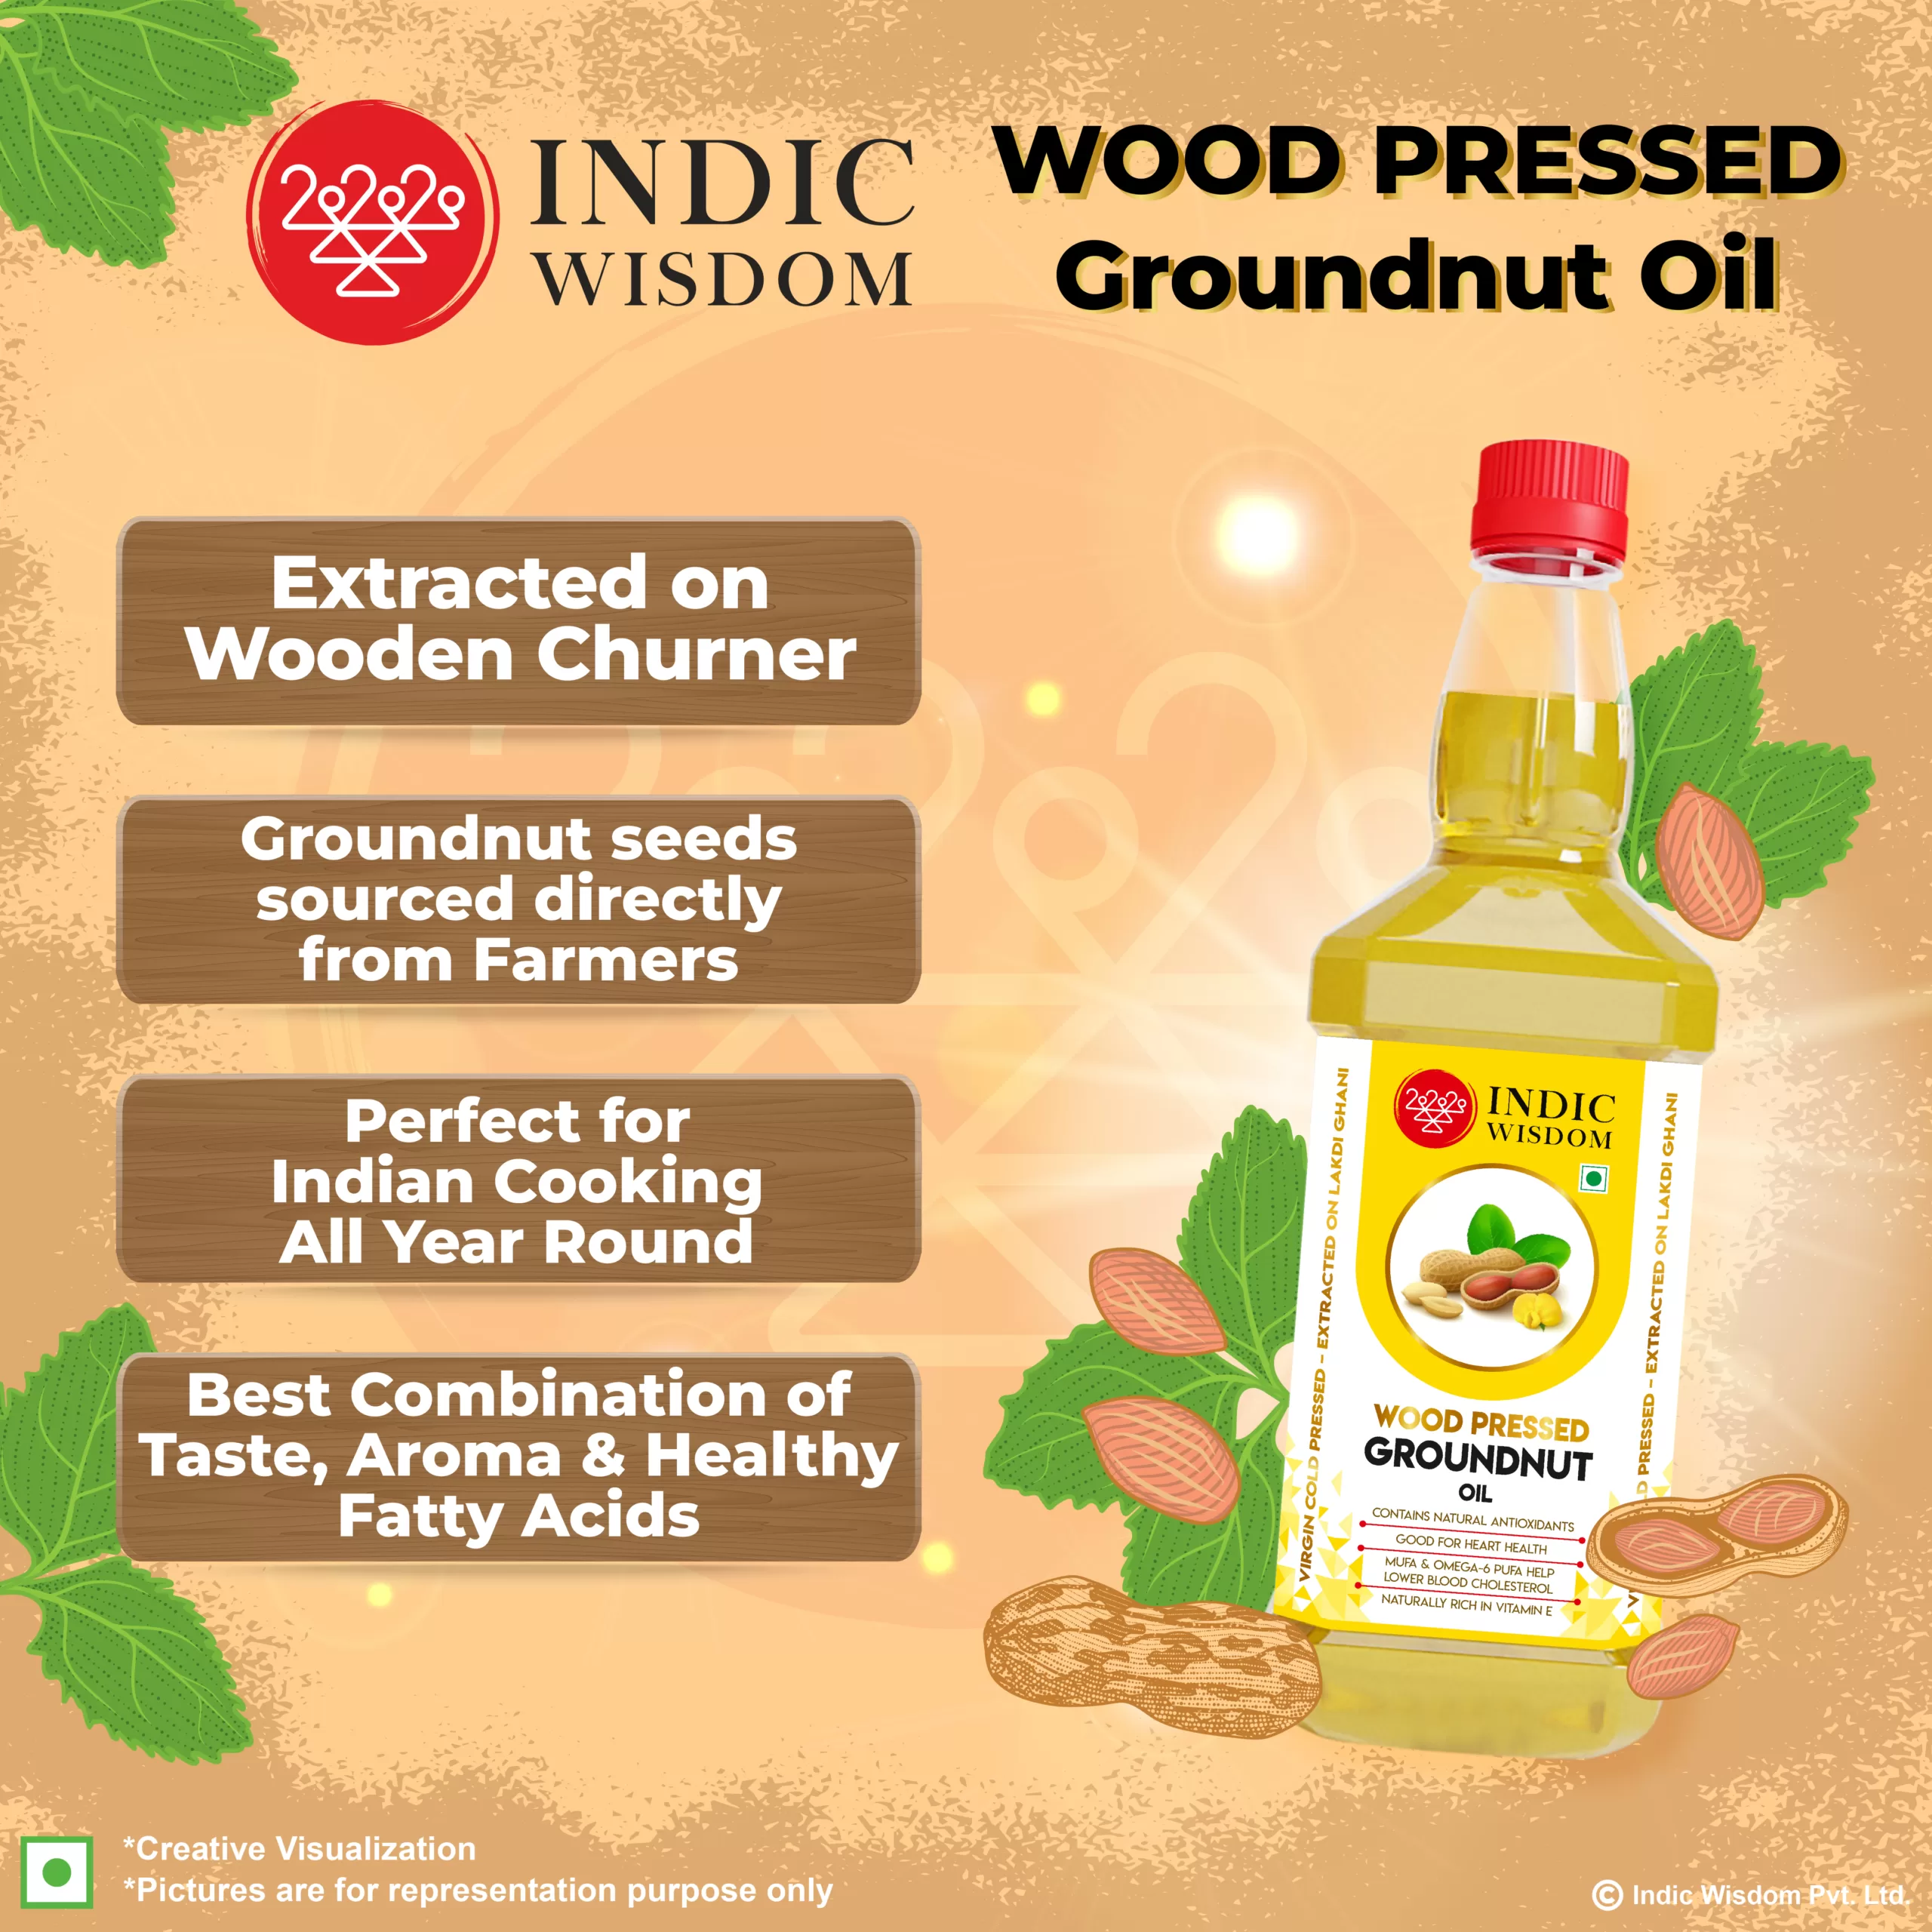 Benefits of wood pressed groundnut oil